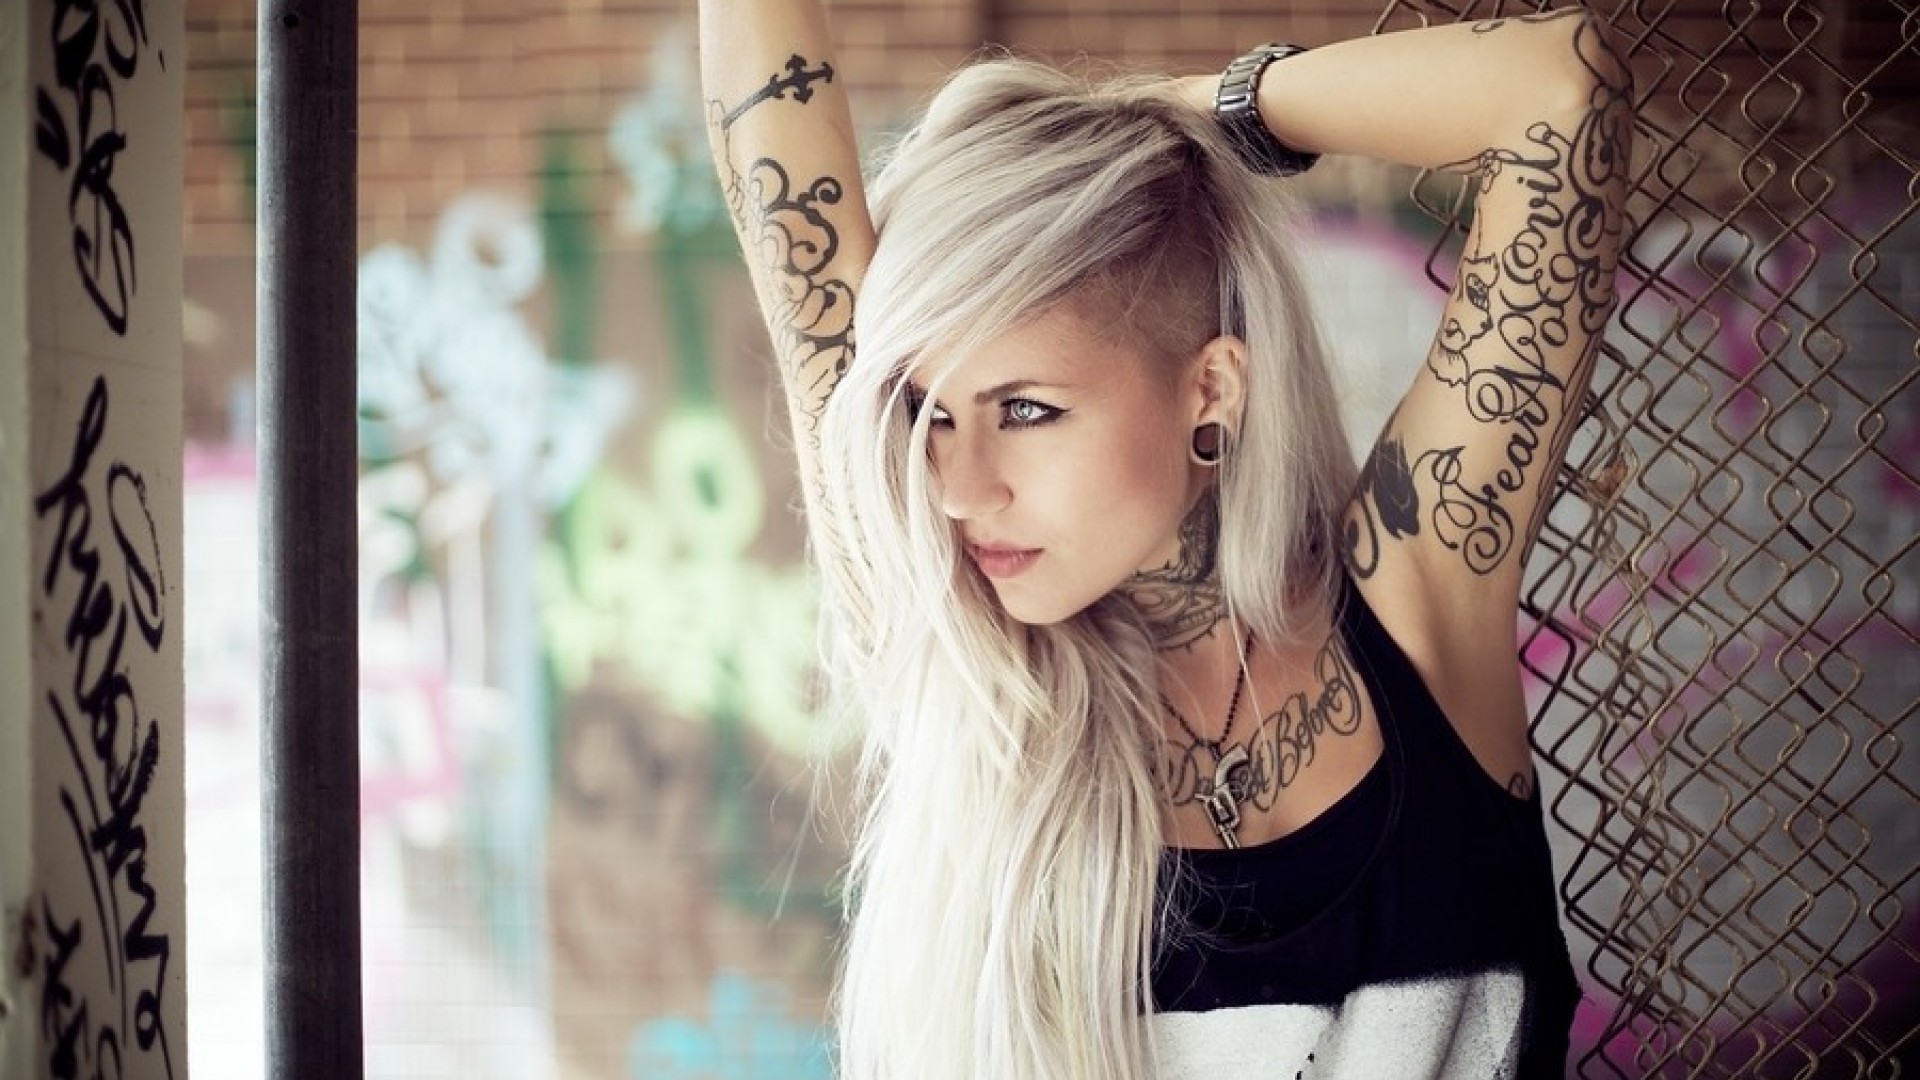 Blonde with tattoos wallpapers and images - wallpapers, pictures, photos